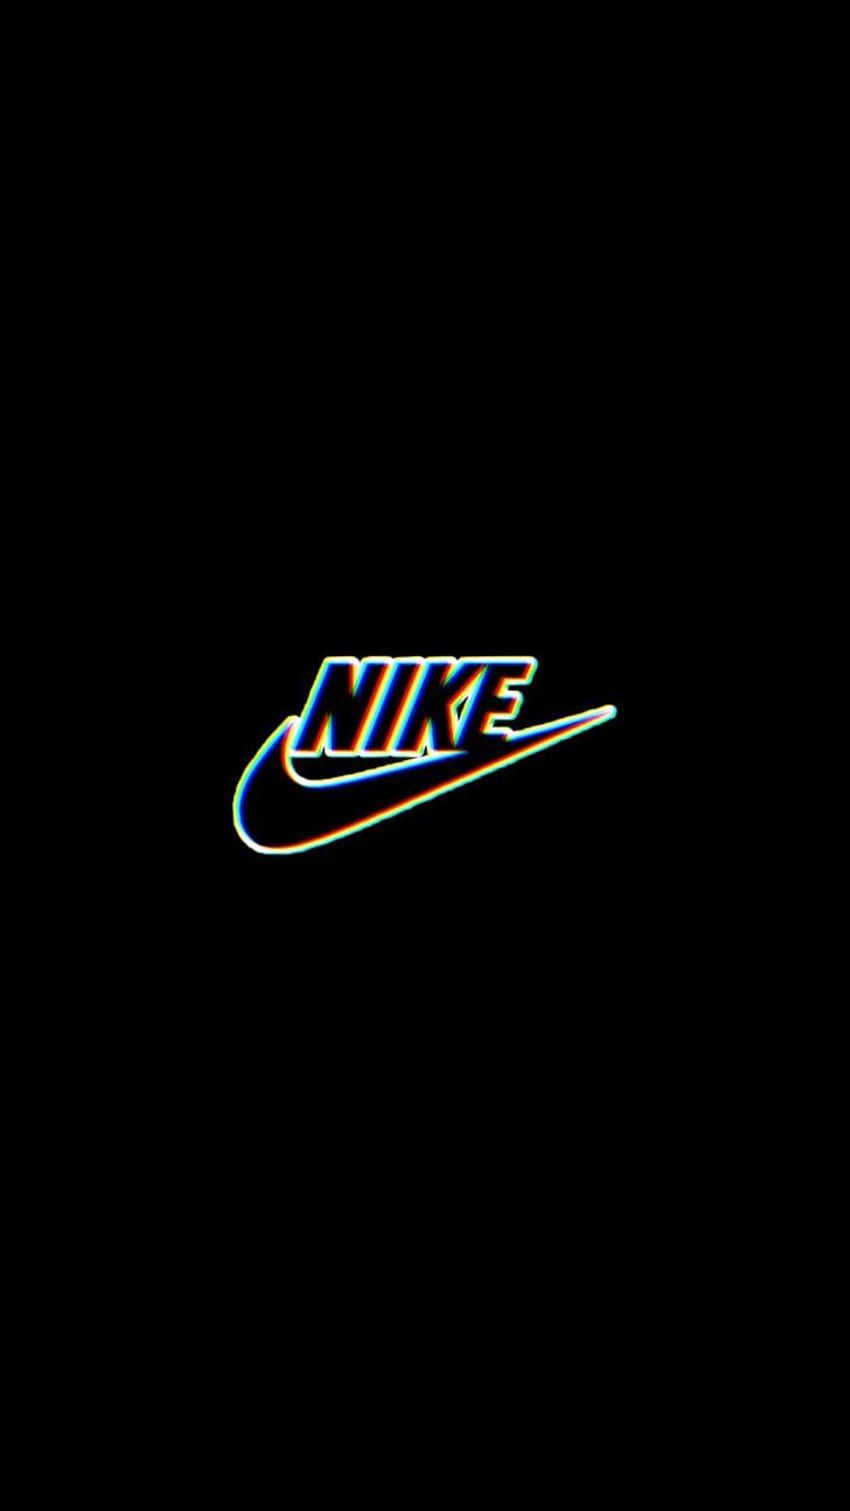 The nike logo in black and neon - Supreme